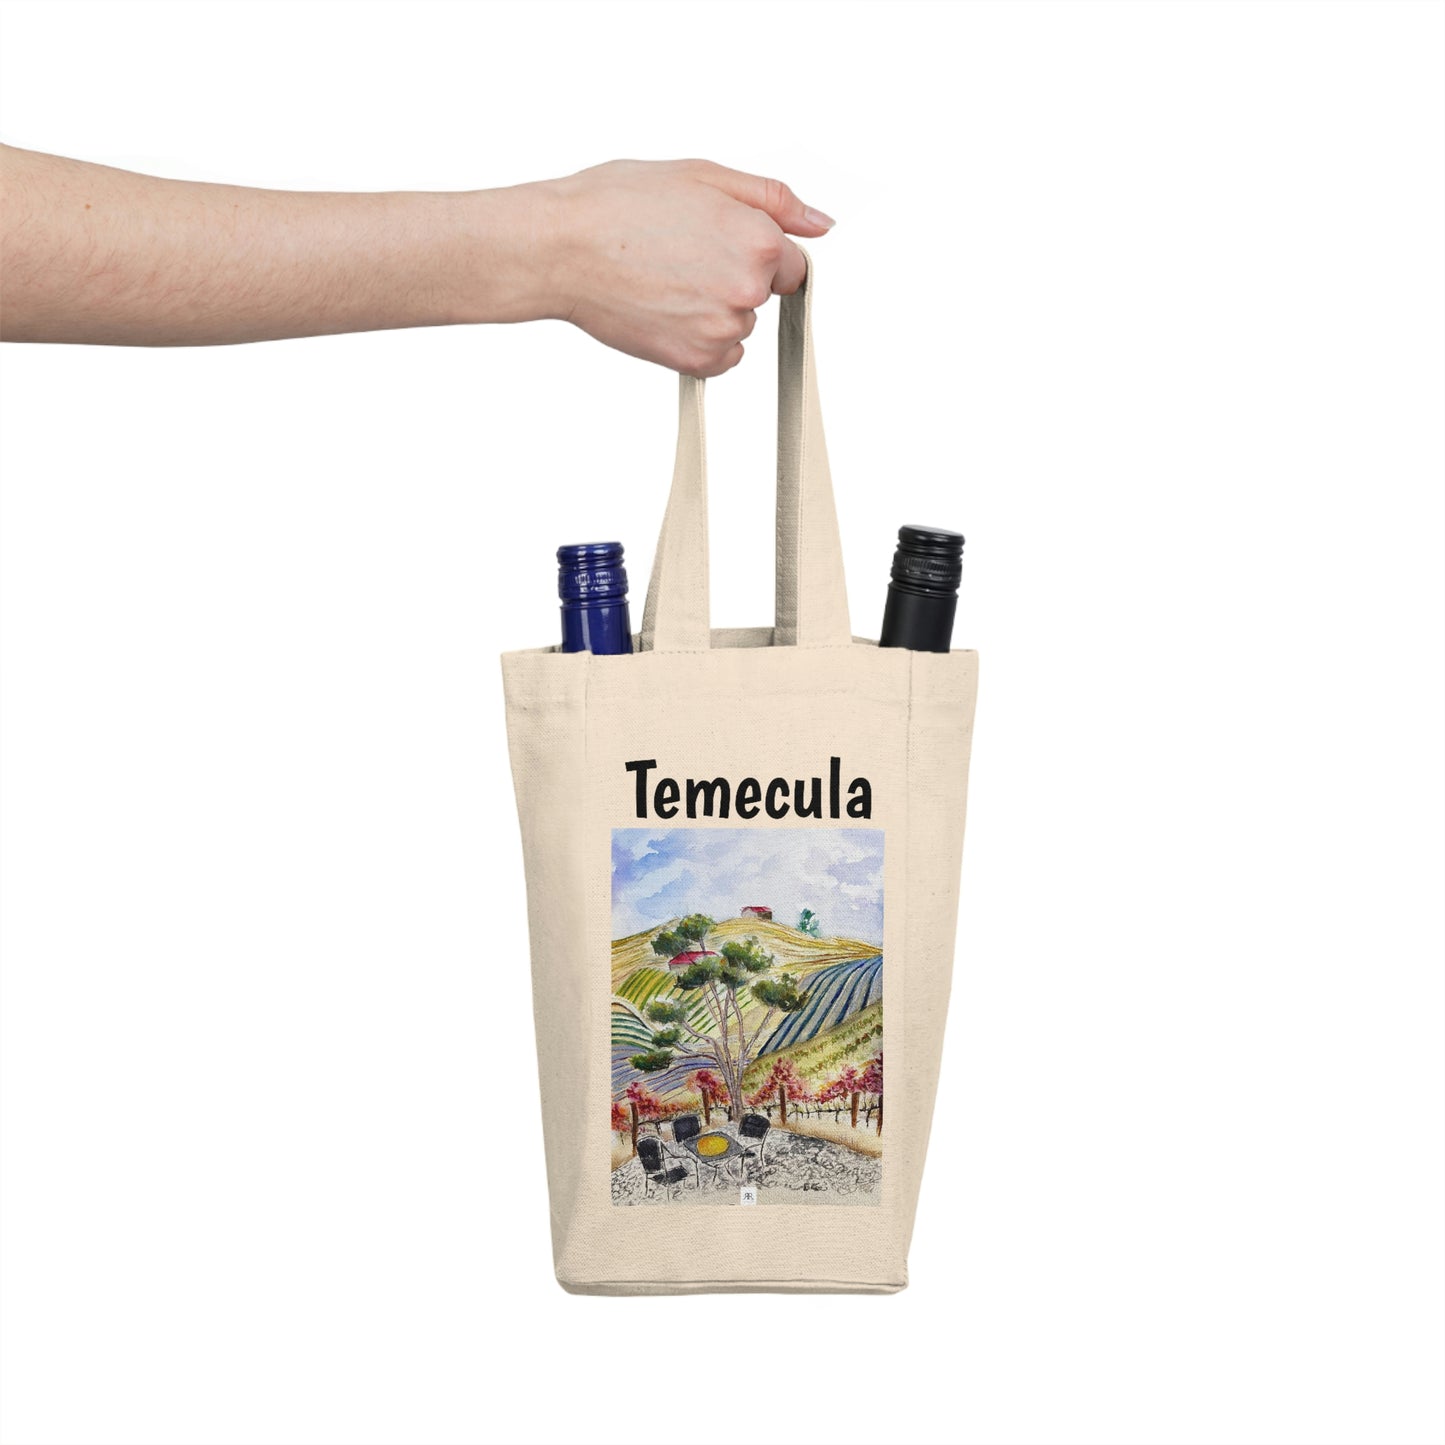 Temecula Double Wine Tote Bag featuring "View from the Patio at GBV" painting